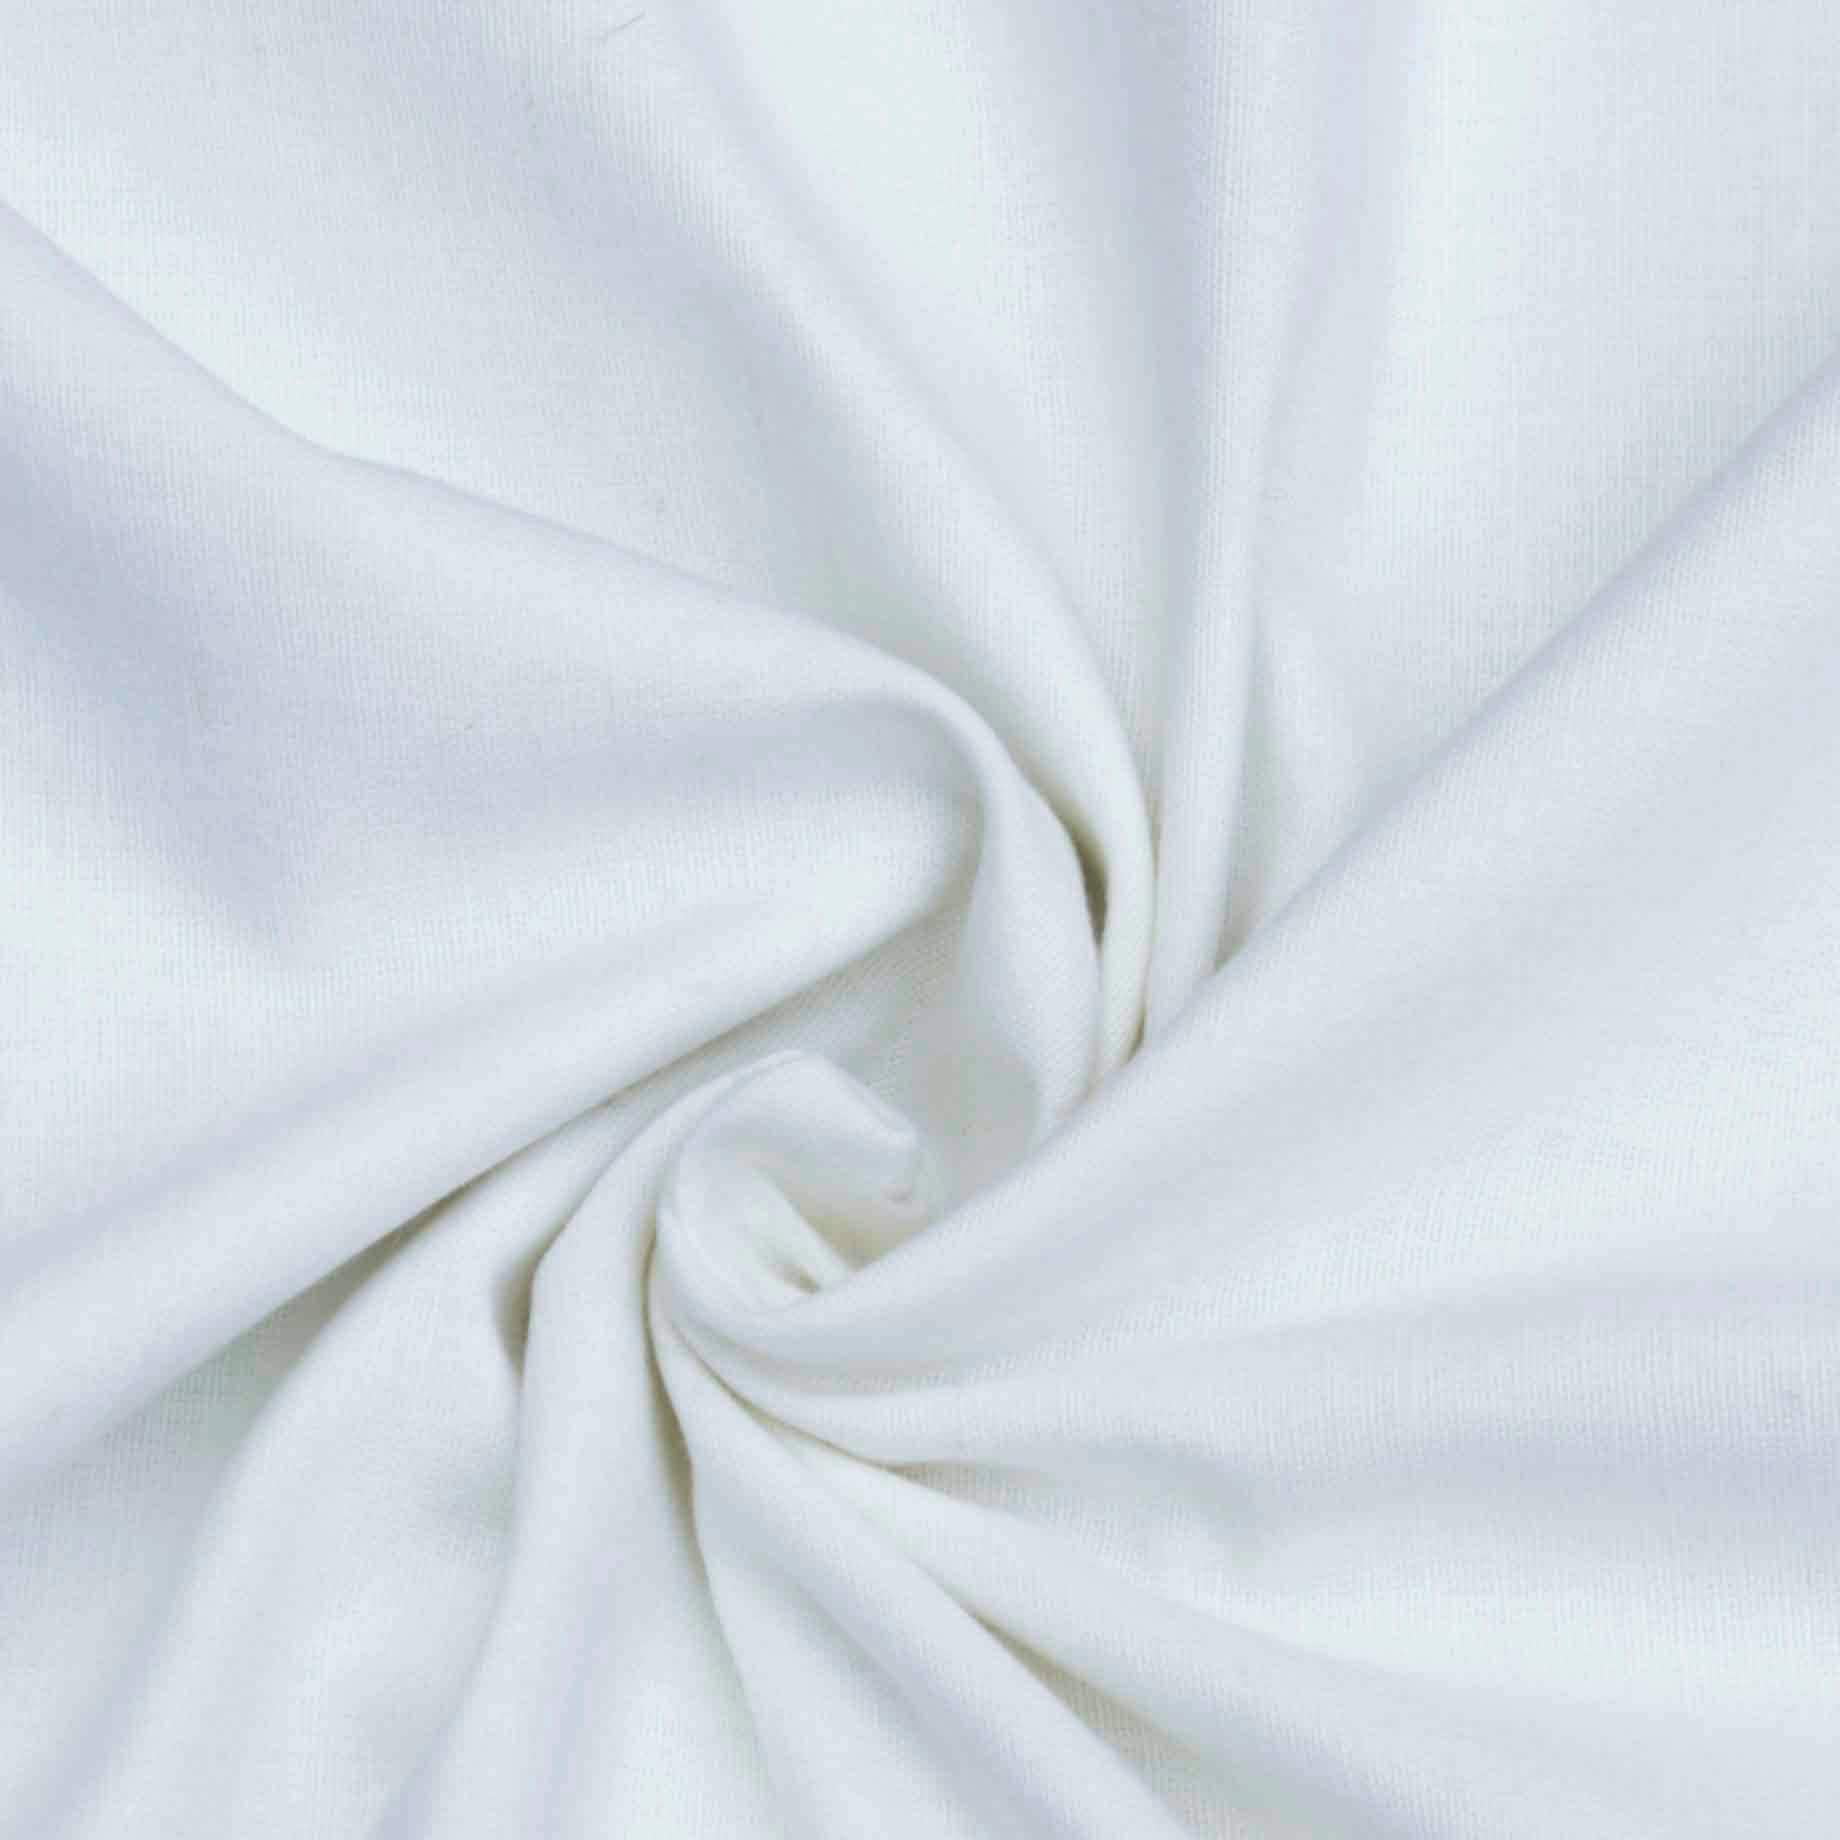 Fabric Mart Direct Off White Cotton Linen Fabric By The Yard, 42 inches or  107 cm width, 1 Yard White Cotton Fabric, Cotton Linen Apparel Clothes  Fabric, Upholstery Curtain Wholesale Fabric 